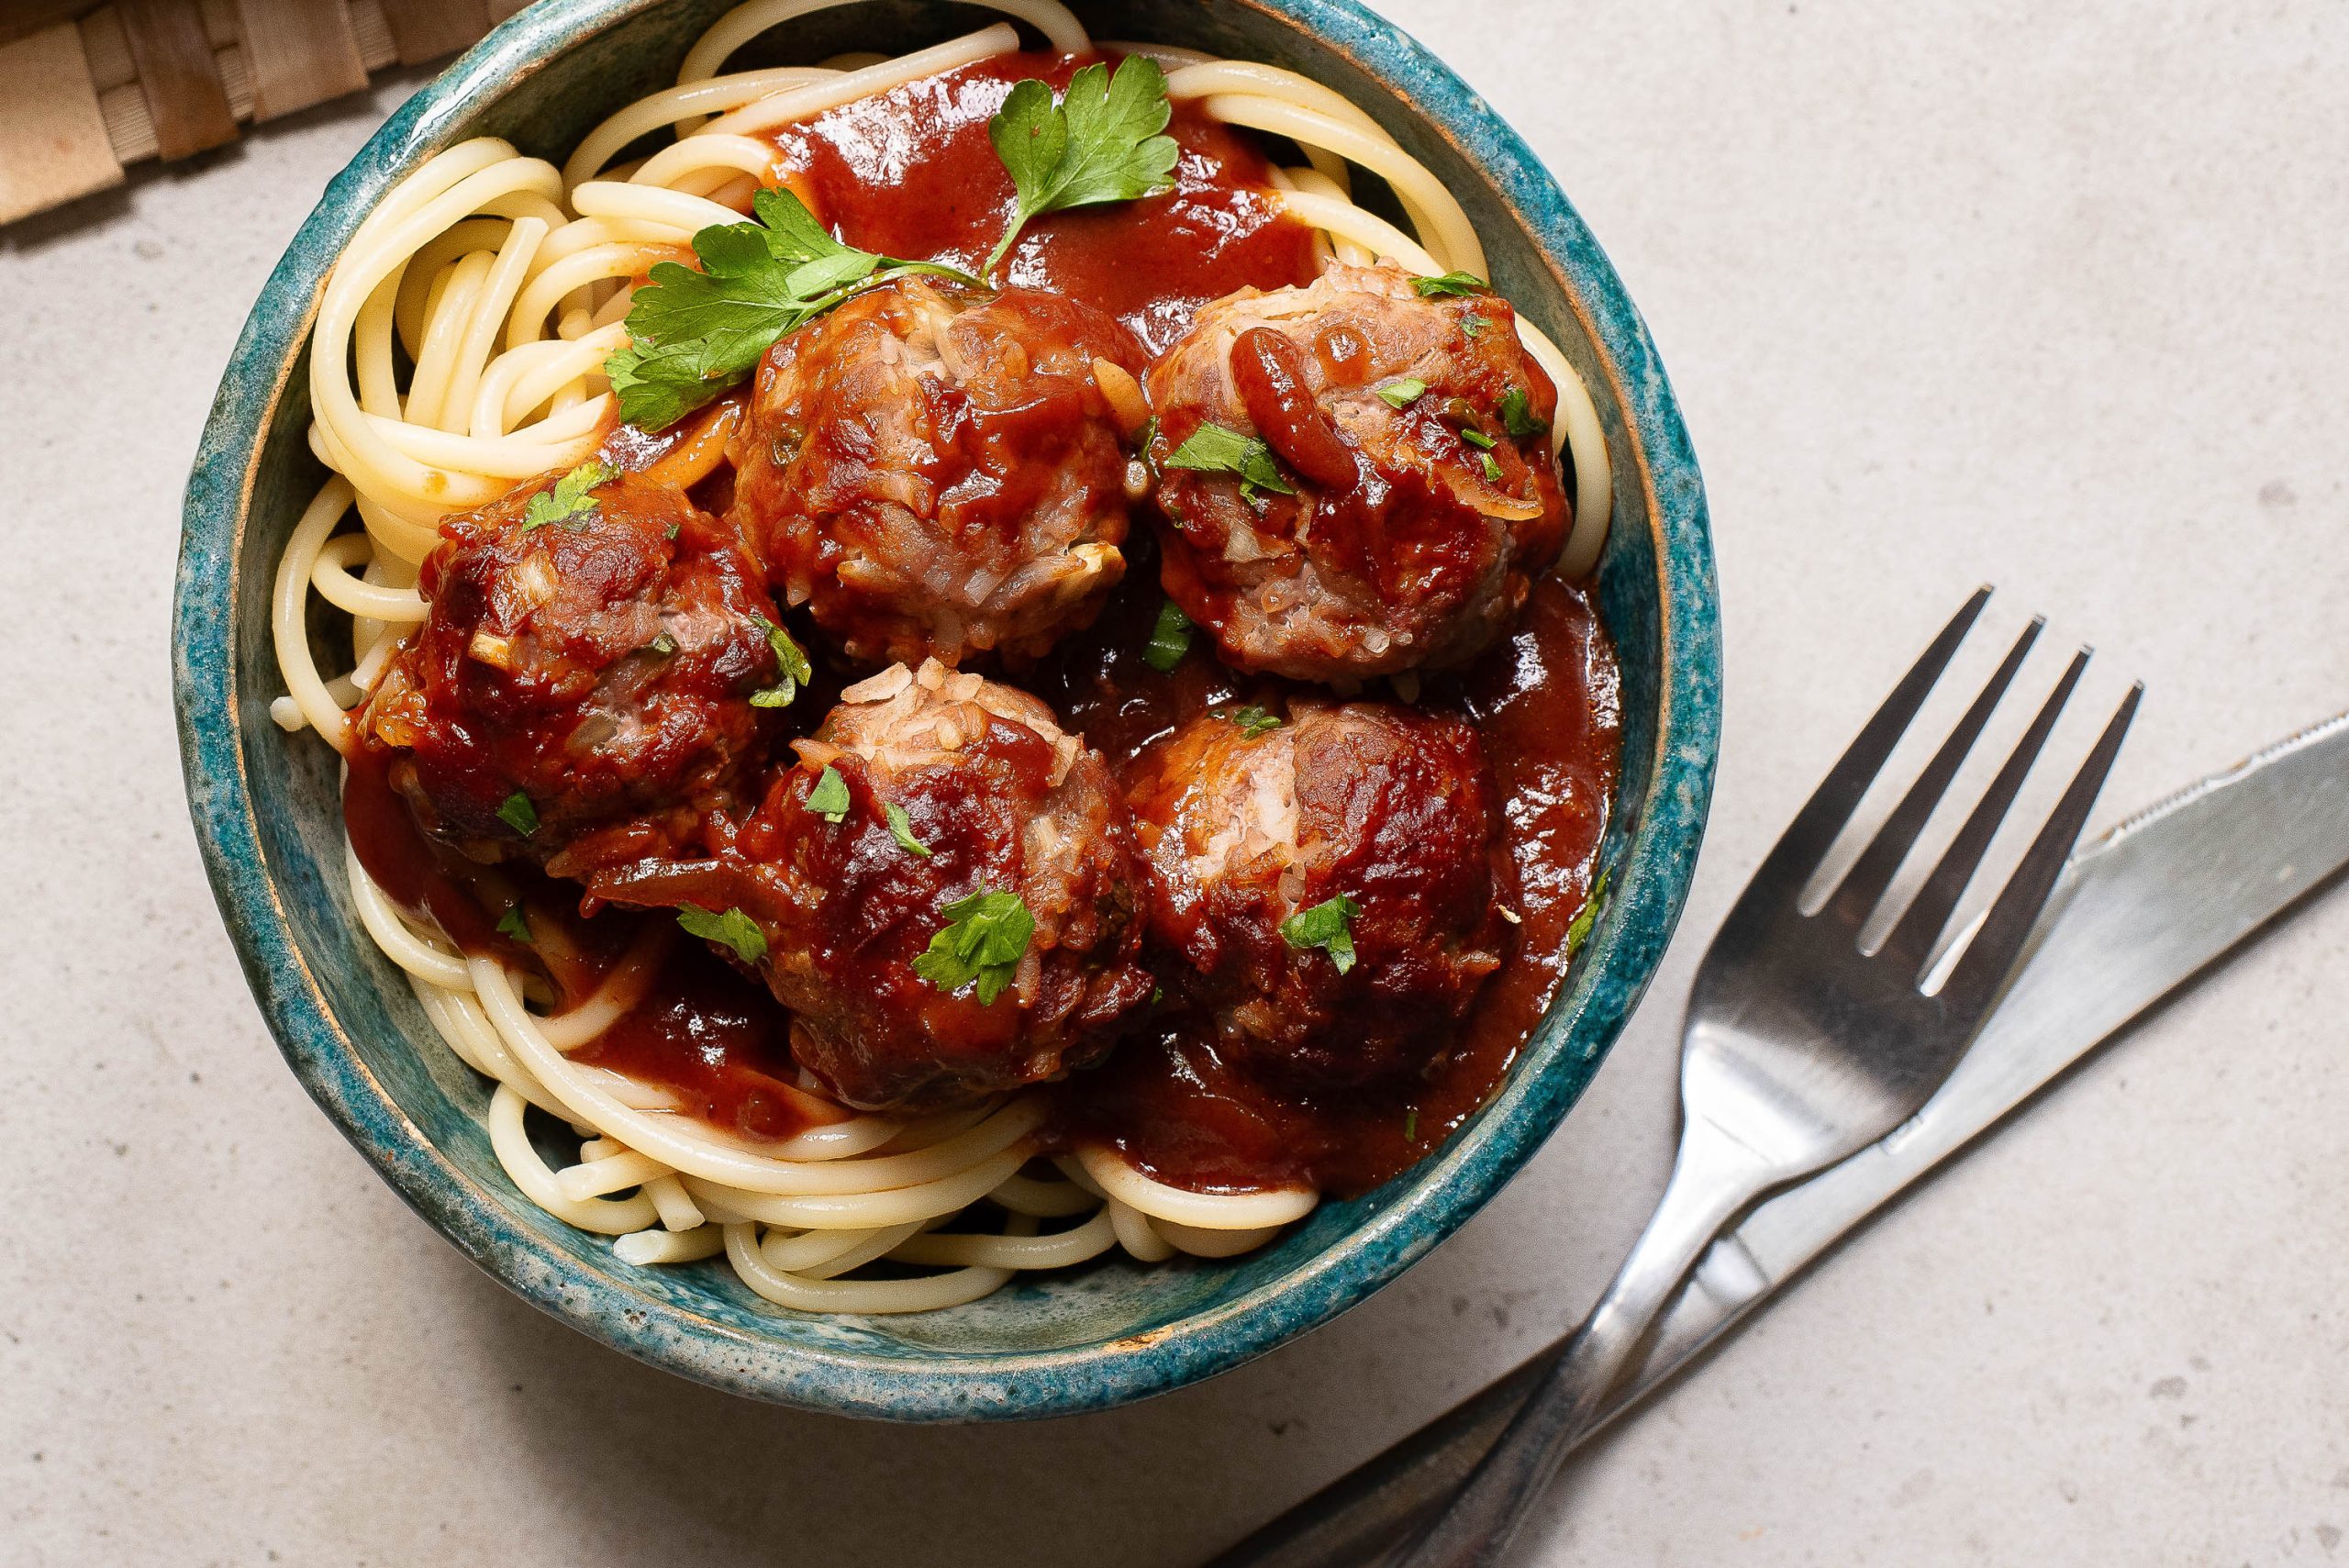 A bowl of spaghetti and porcupine meatballs.